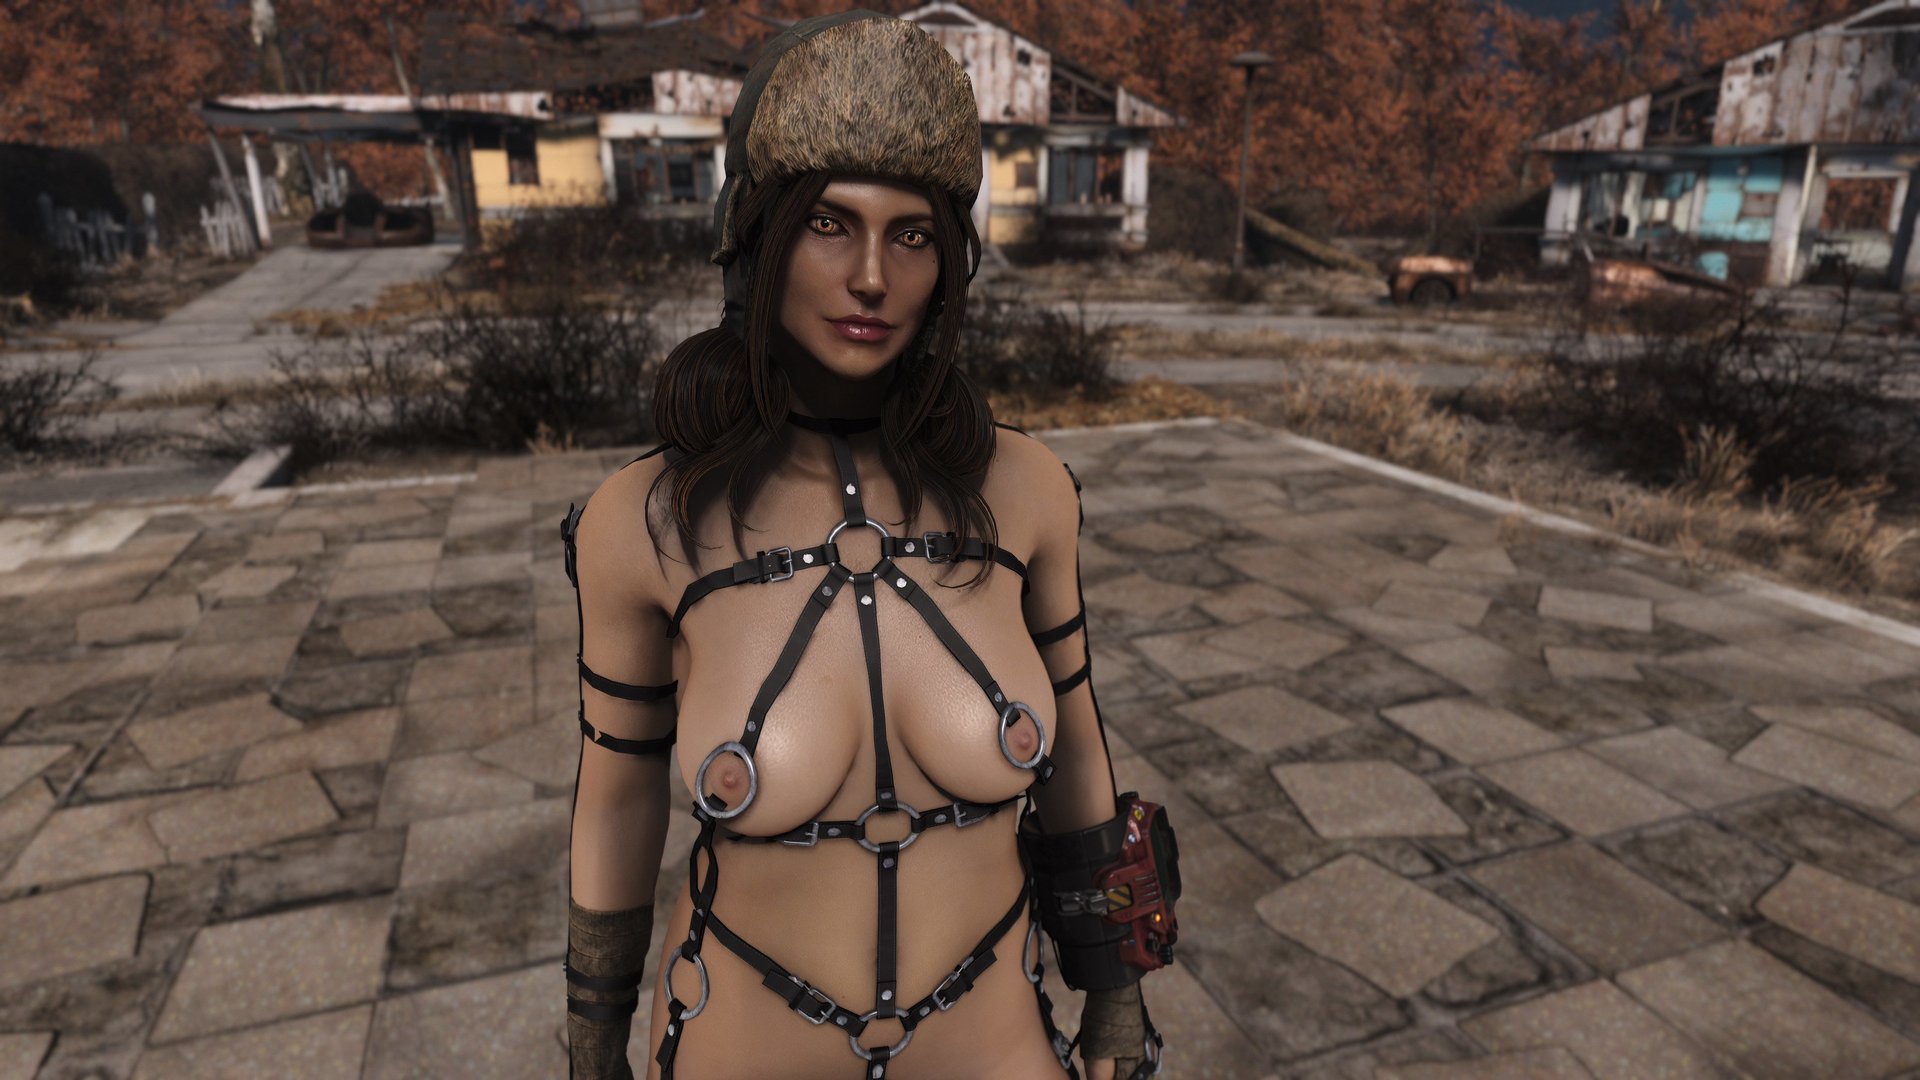 Immersive facial animations fallout 4 фото 36